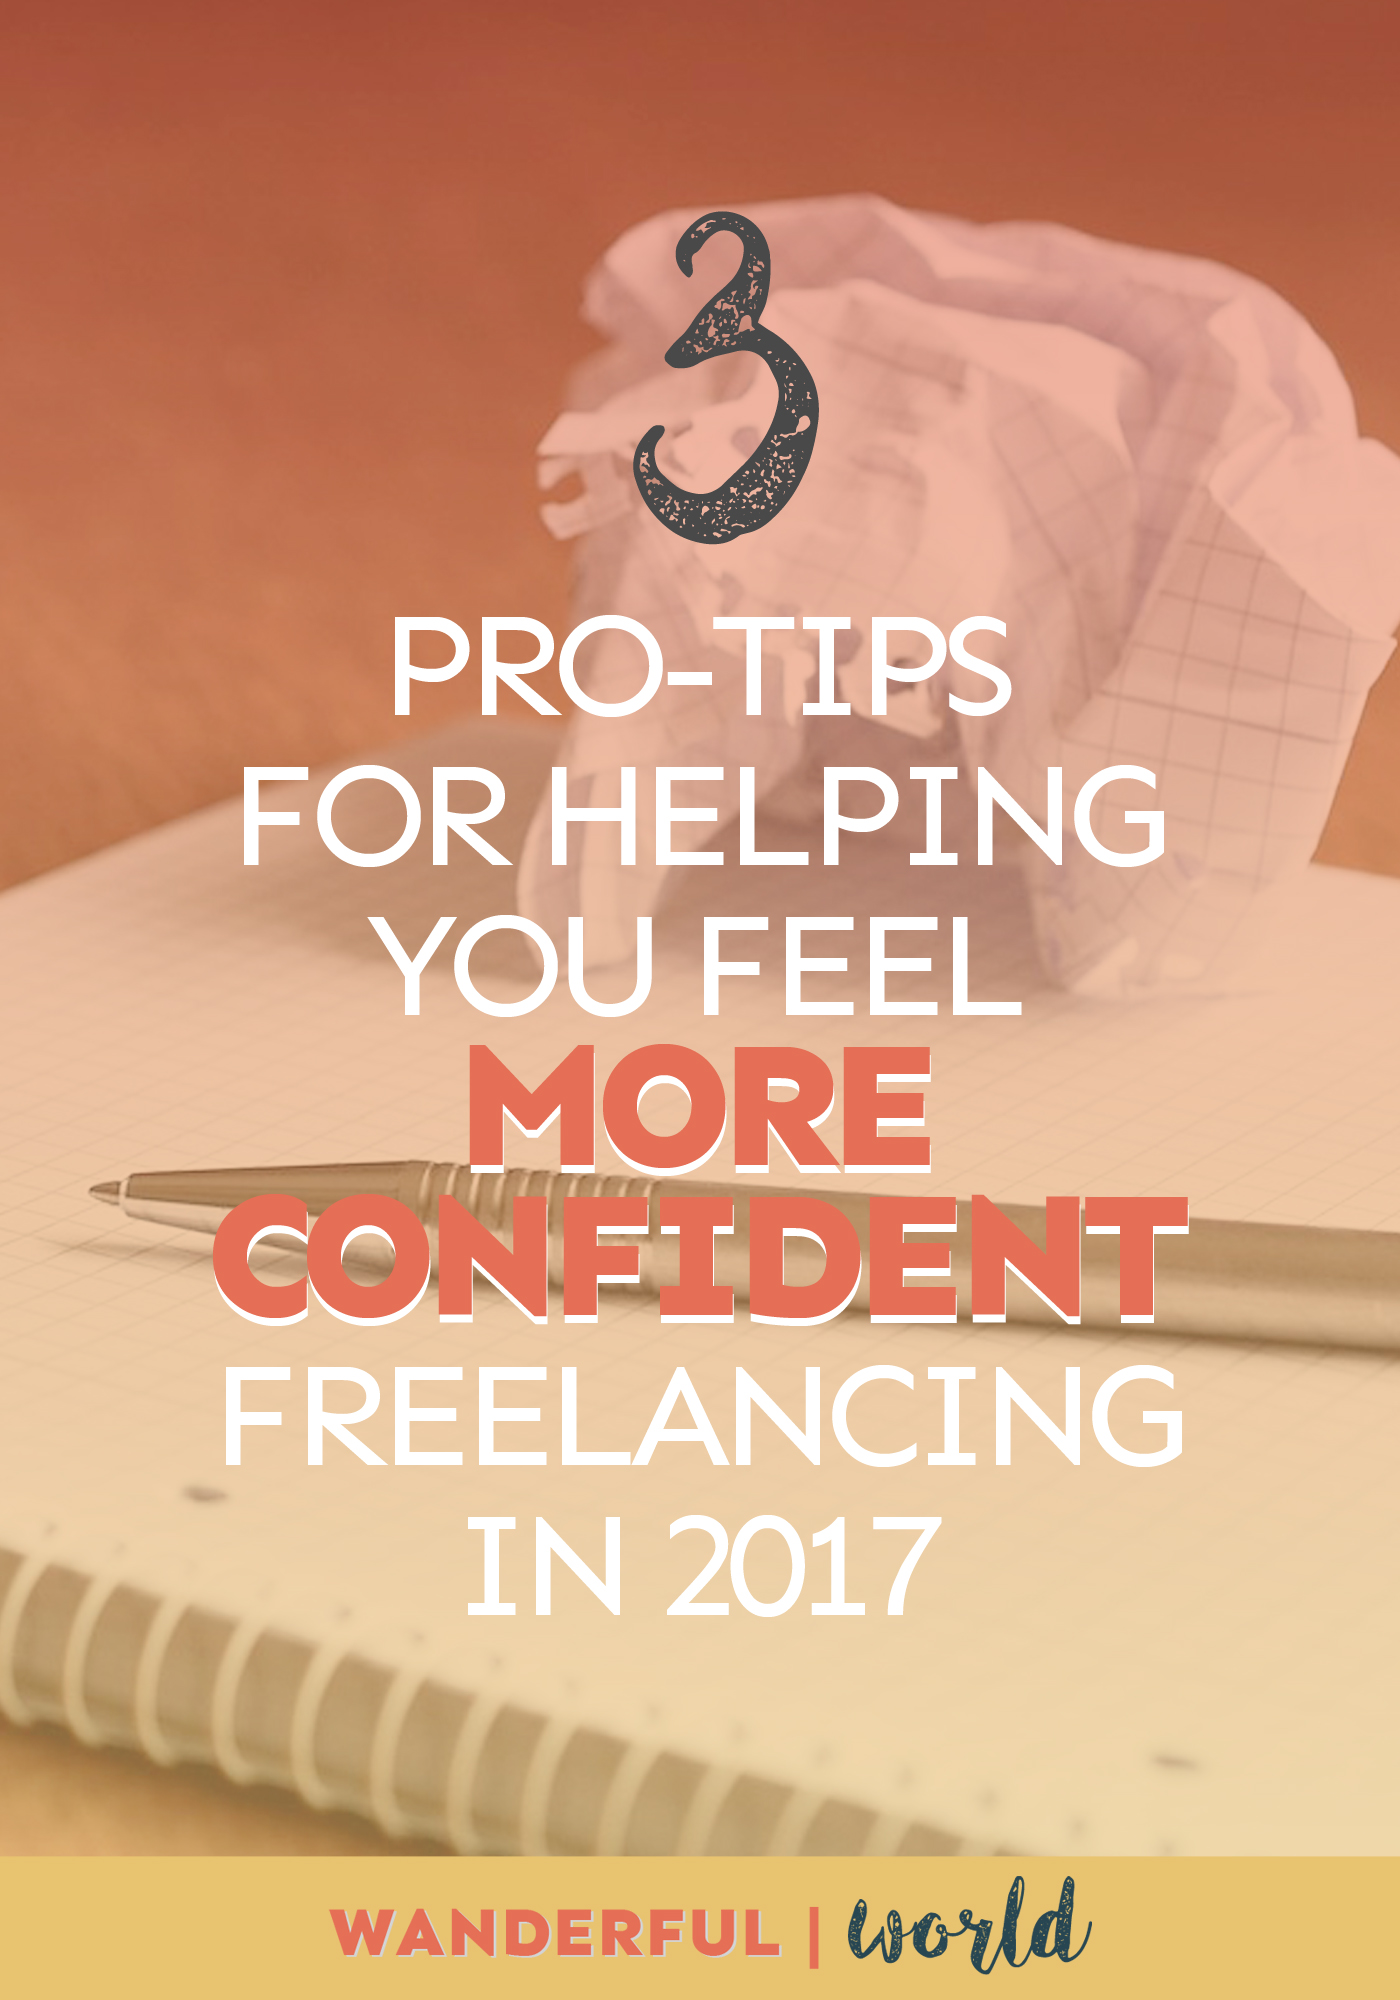 Lacking confidence when it comes to freelancing? Try these 3 pro-tips and see if your confidence soars!